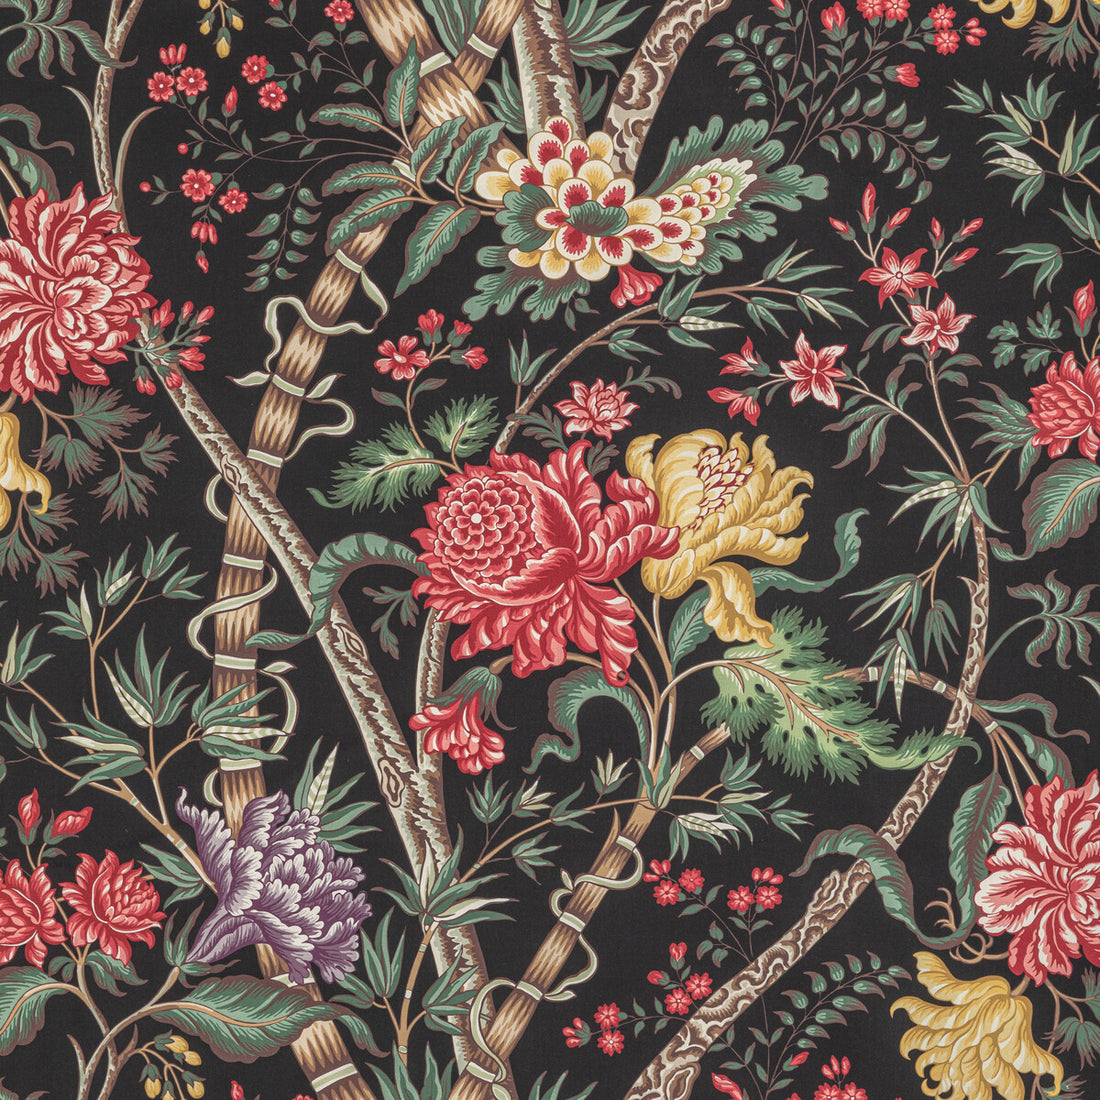 Luberon Print fabric in noir/multi color - pattern 8022100.819.0 - by Brunschwig &amp; Fils in the Manoir collection